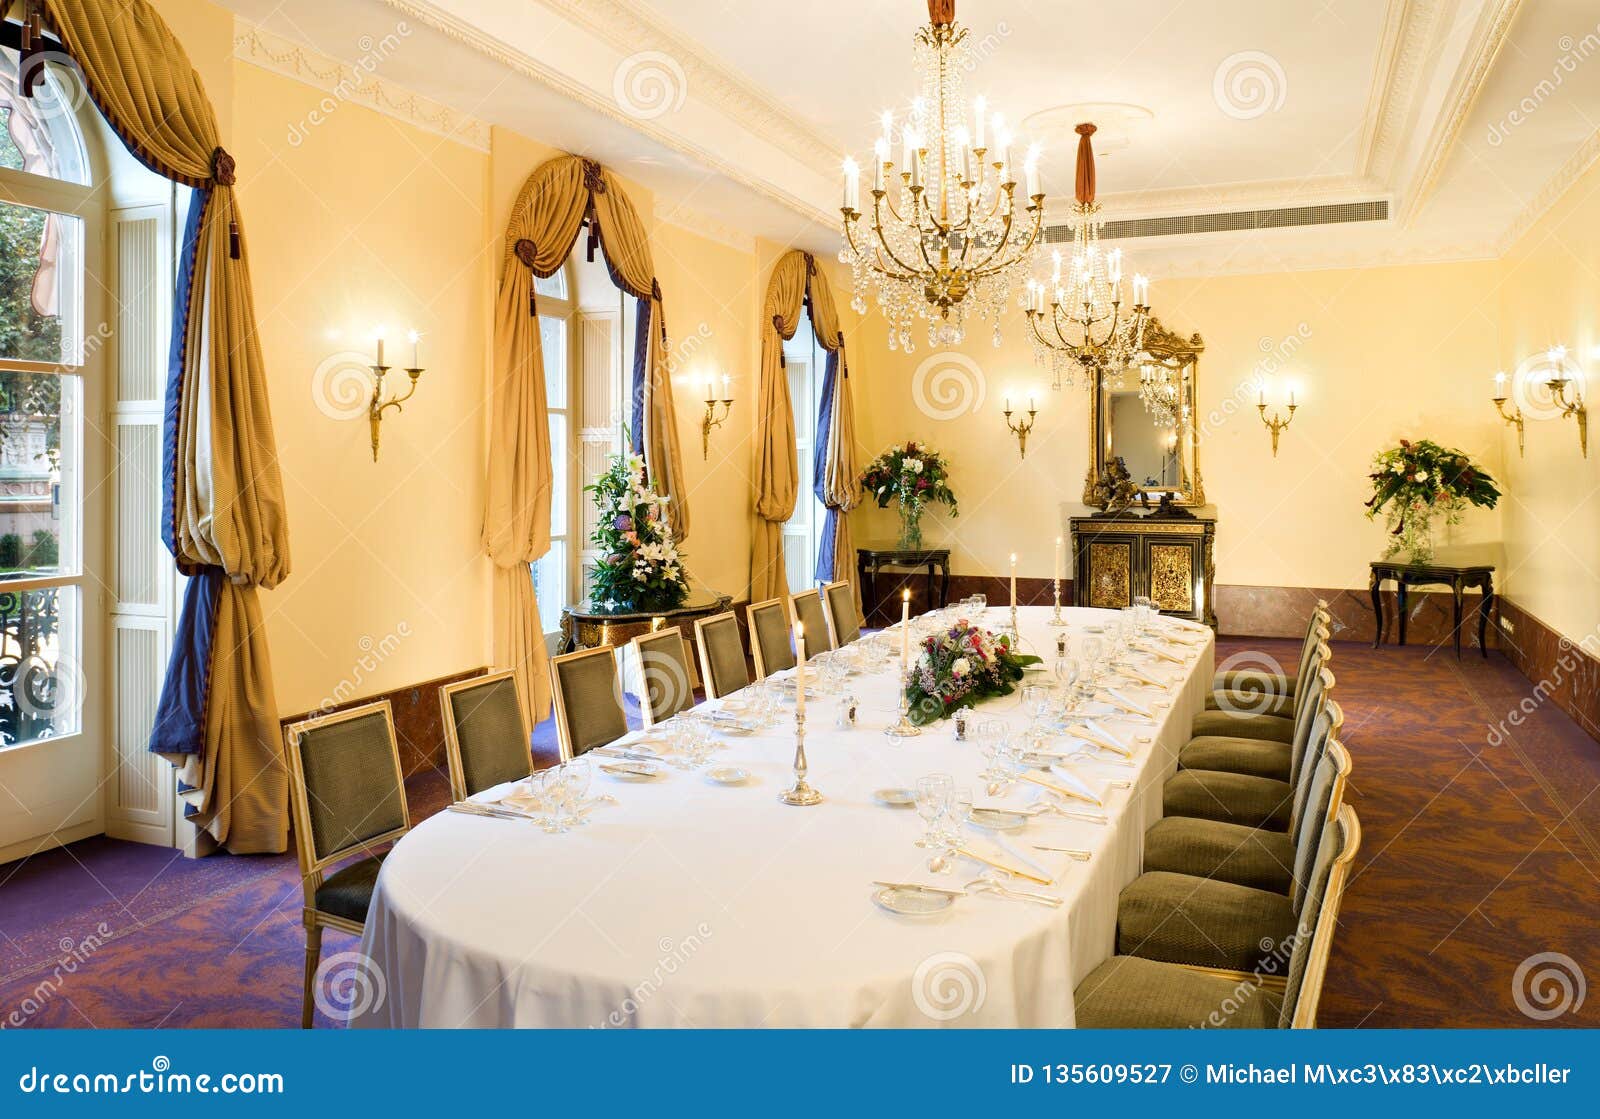 belle epoque: the beau rivage palace conference room